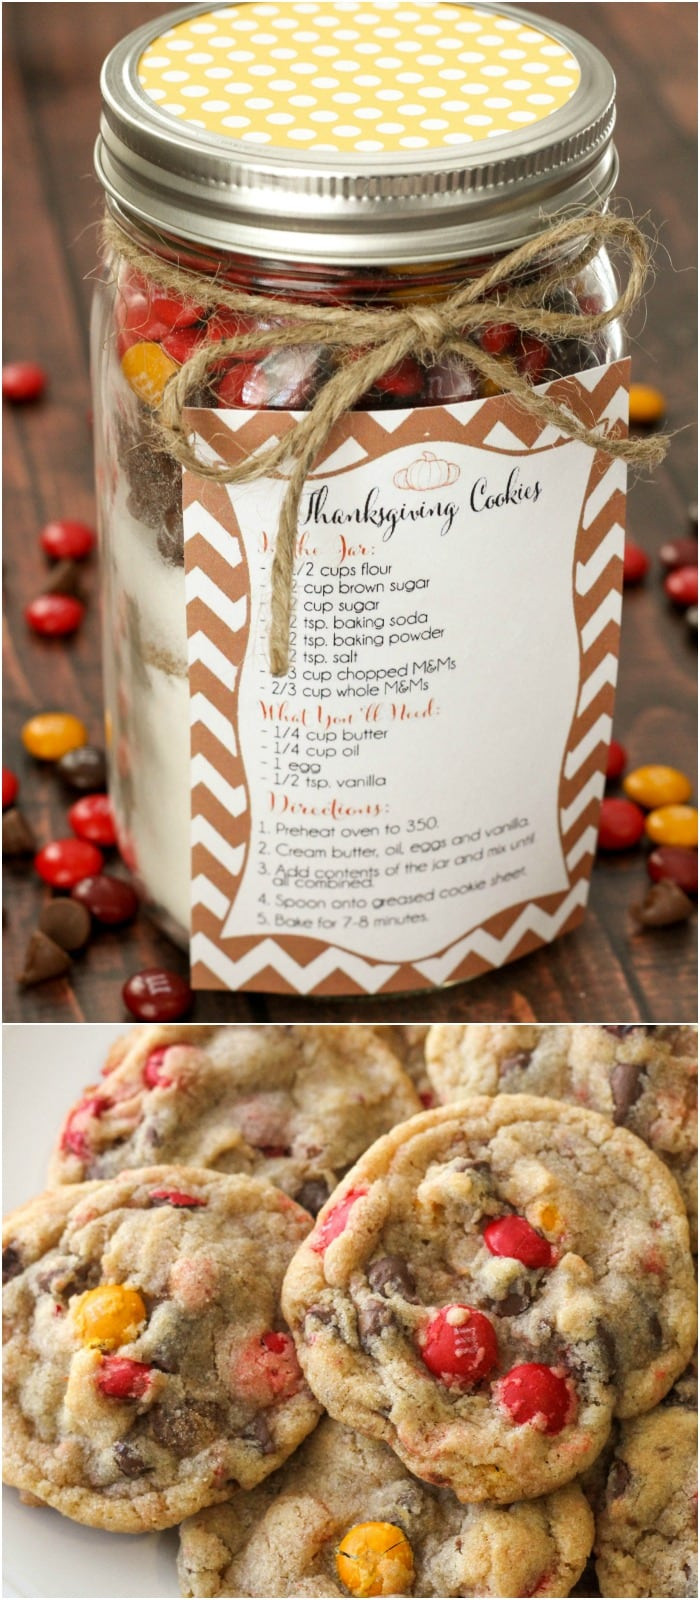 Thanksgiving Gift Ideas For The Family
 Thanksgiving Cookie Jar Gift